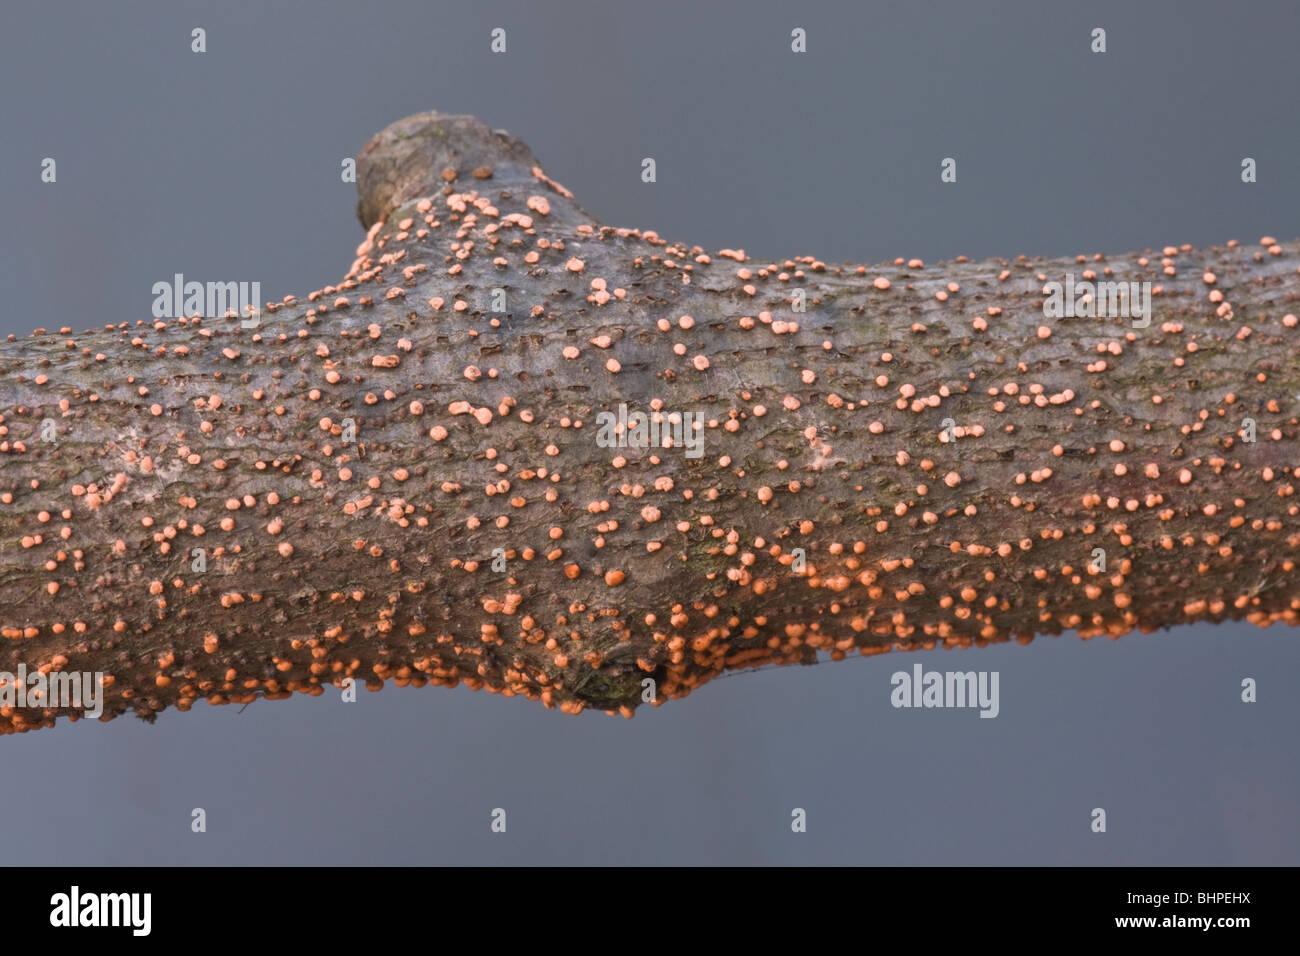 Coral spot fungus (Nectria cinnabarina) growing on an untreated rustic fence. Stock Photo